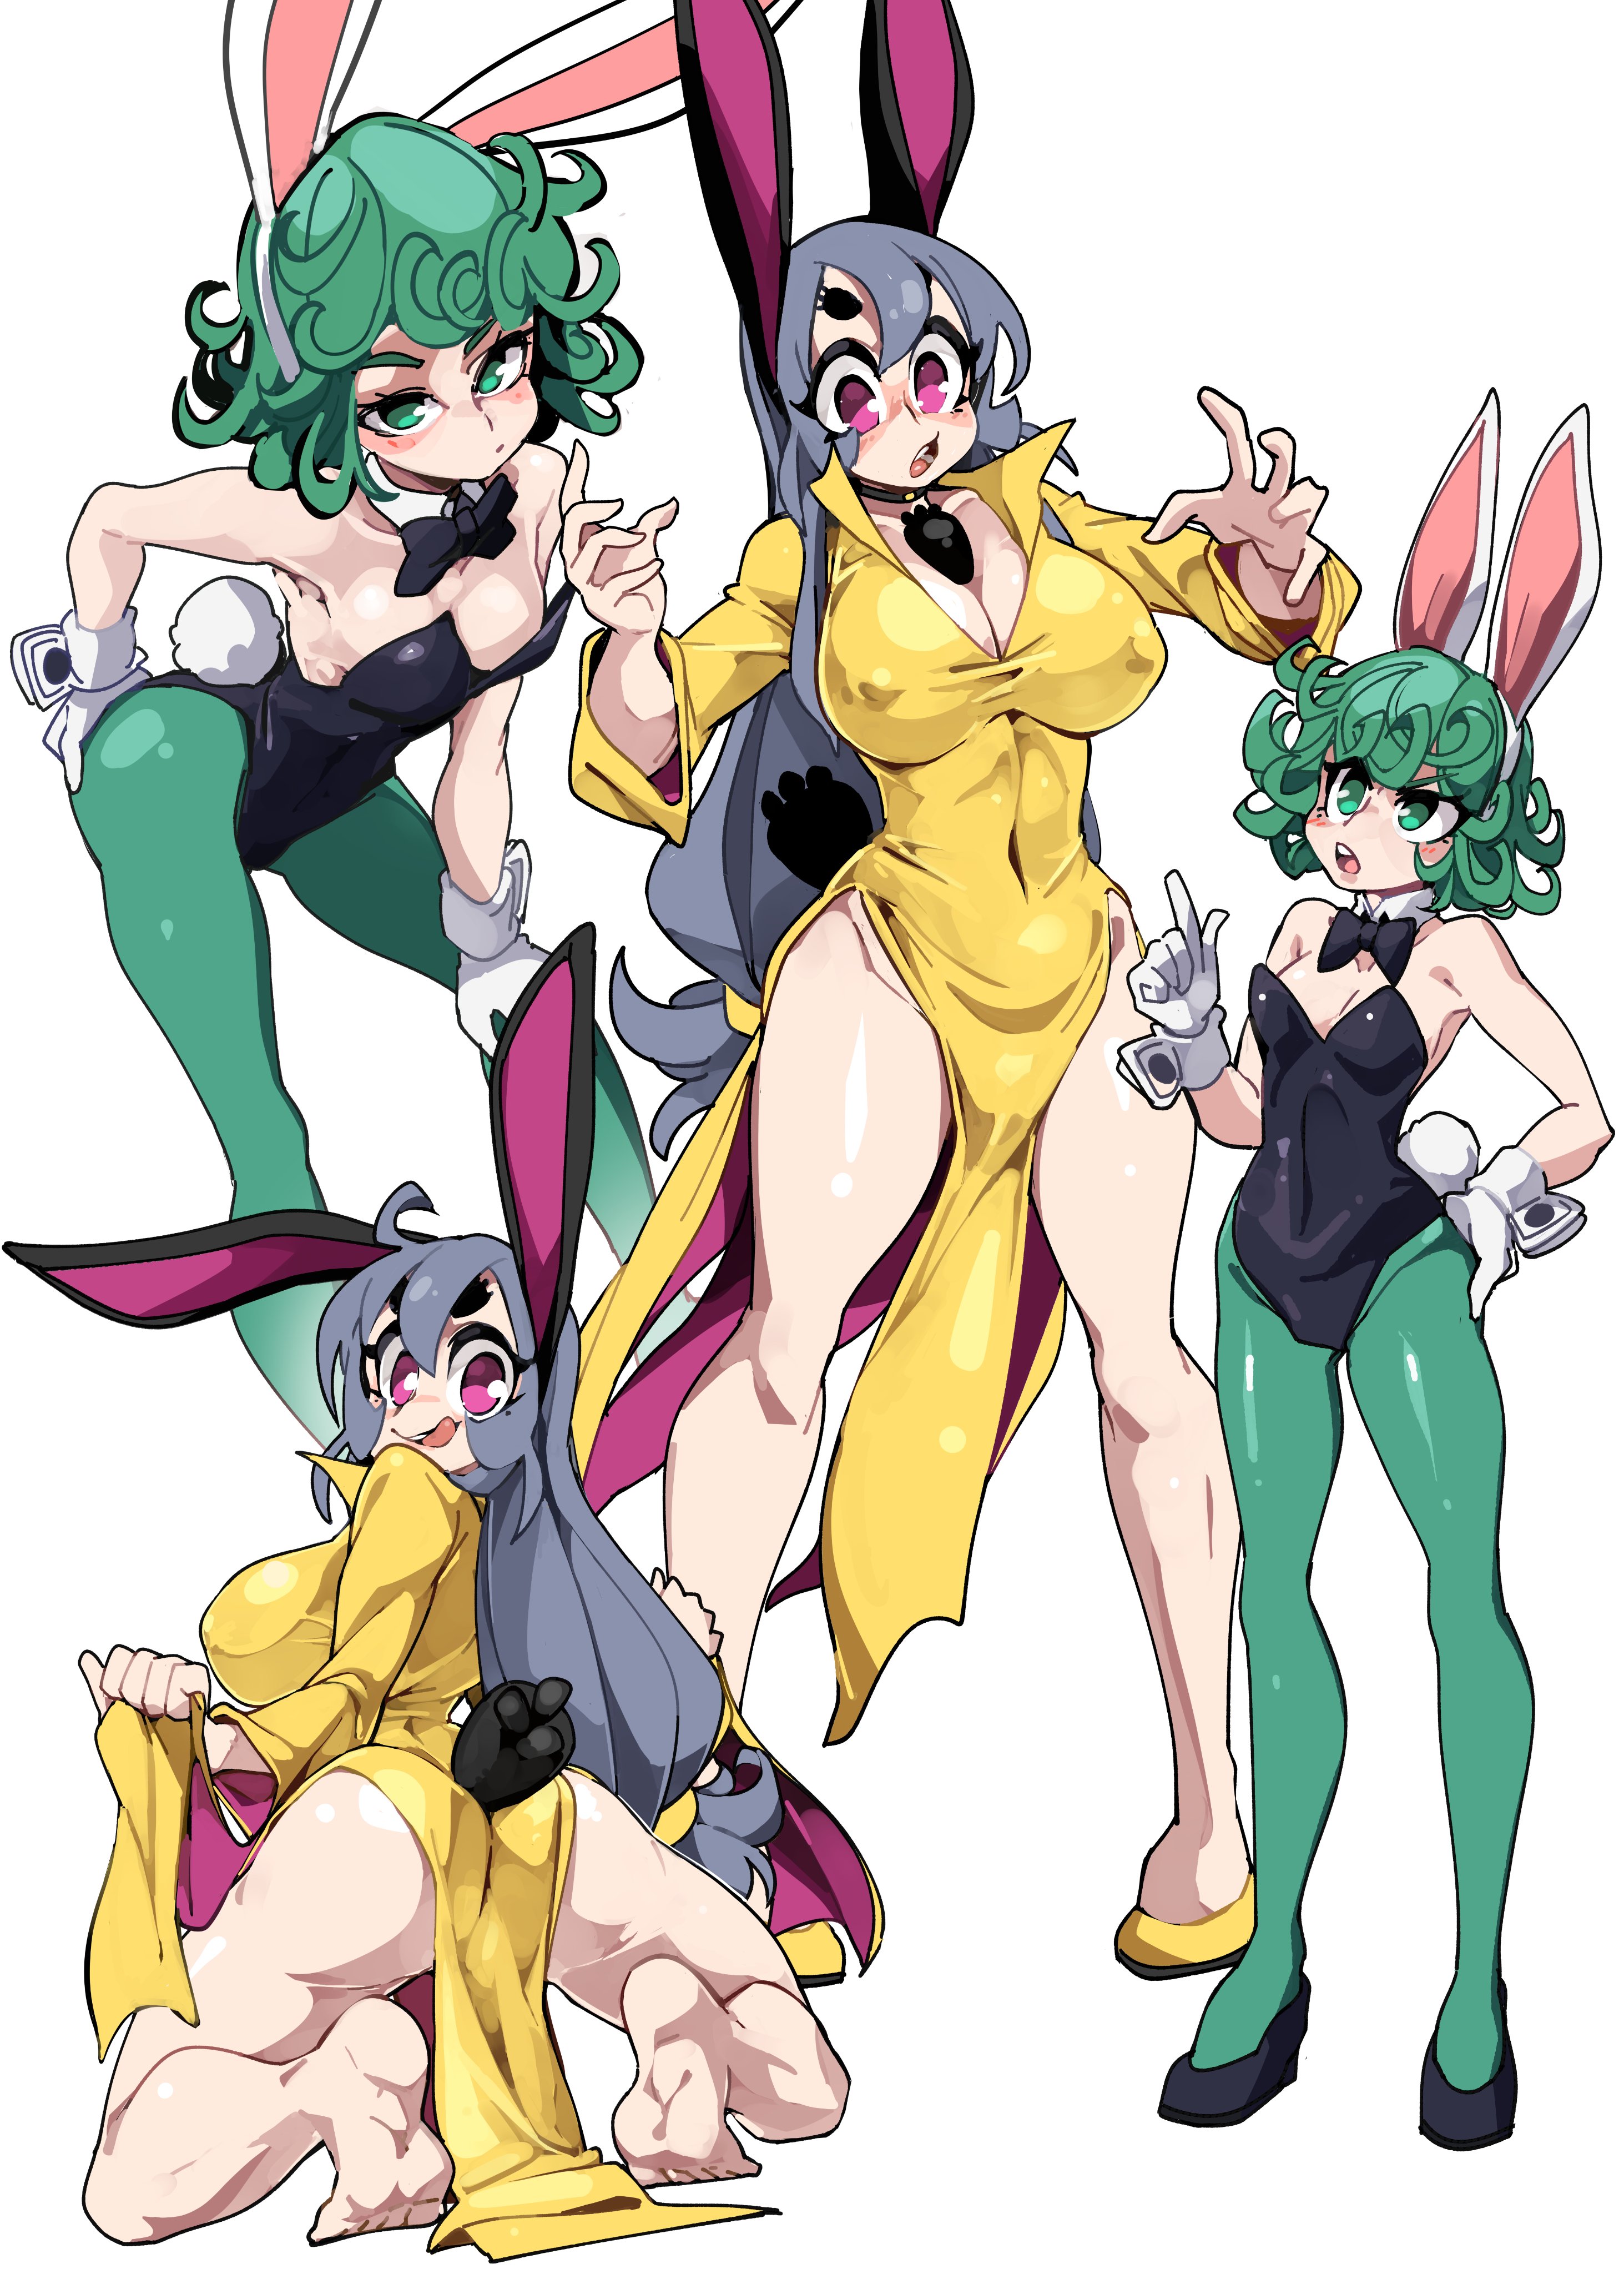 Anime 2926x4096 One-Punch Man bunny girl anime girls portrait display anime looking at viewer bunny suit Tatsumaki Tank (Bongfill) cleavage animal ears bunny ears bunny tail looking back looking up foot sole barefoot lifting clothes green pantyhose gloves yellow dress kneeling big boobs nipple bulge bow tie two women Bongfill green hair green eyes gray hair pink eyes open mouth hands on ass tongue out black leotard white gloves simple background feet ass white background minimalism thighs